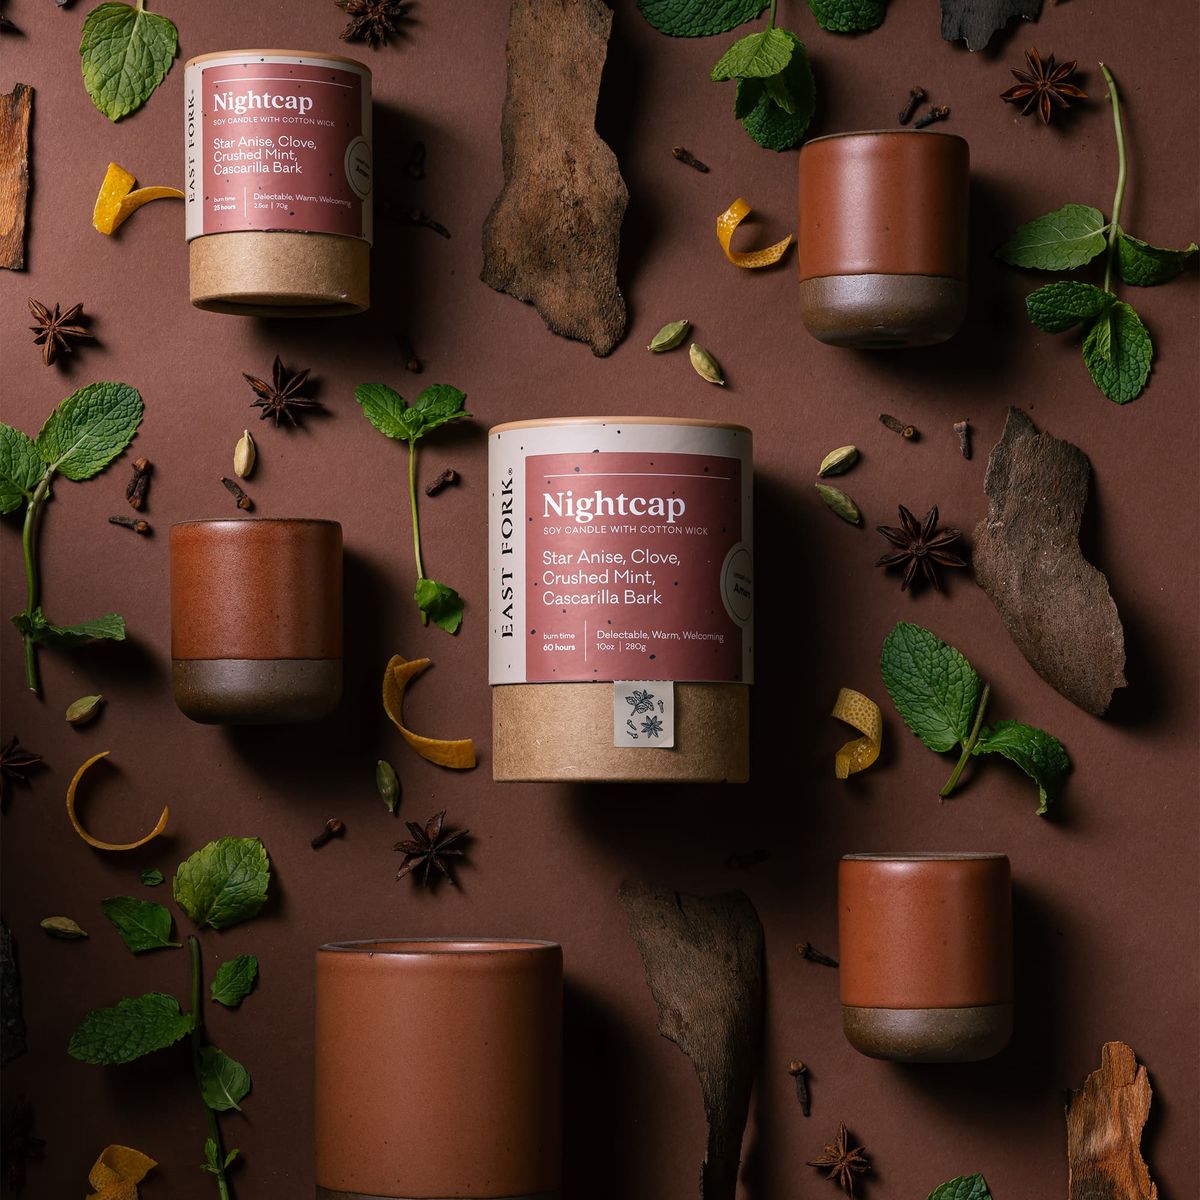 An artful layout of The Candle in Nightcap - centered is a cardboard packaging tube with the candle's name, surrounded by small and large ceramic candles in a cylindrical vessel in a cool terracotta color, surrounded by anise, mint, clove, and bark.